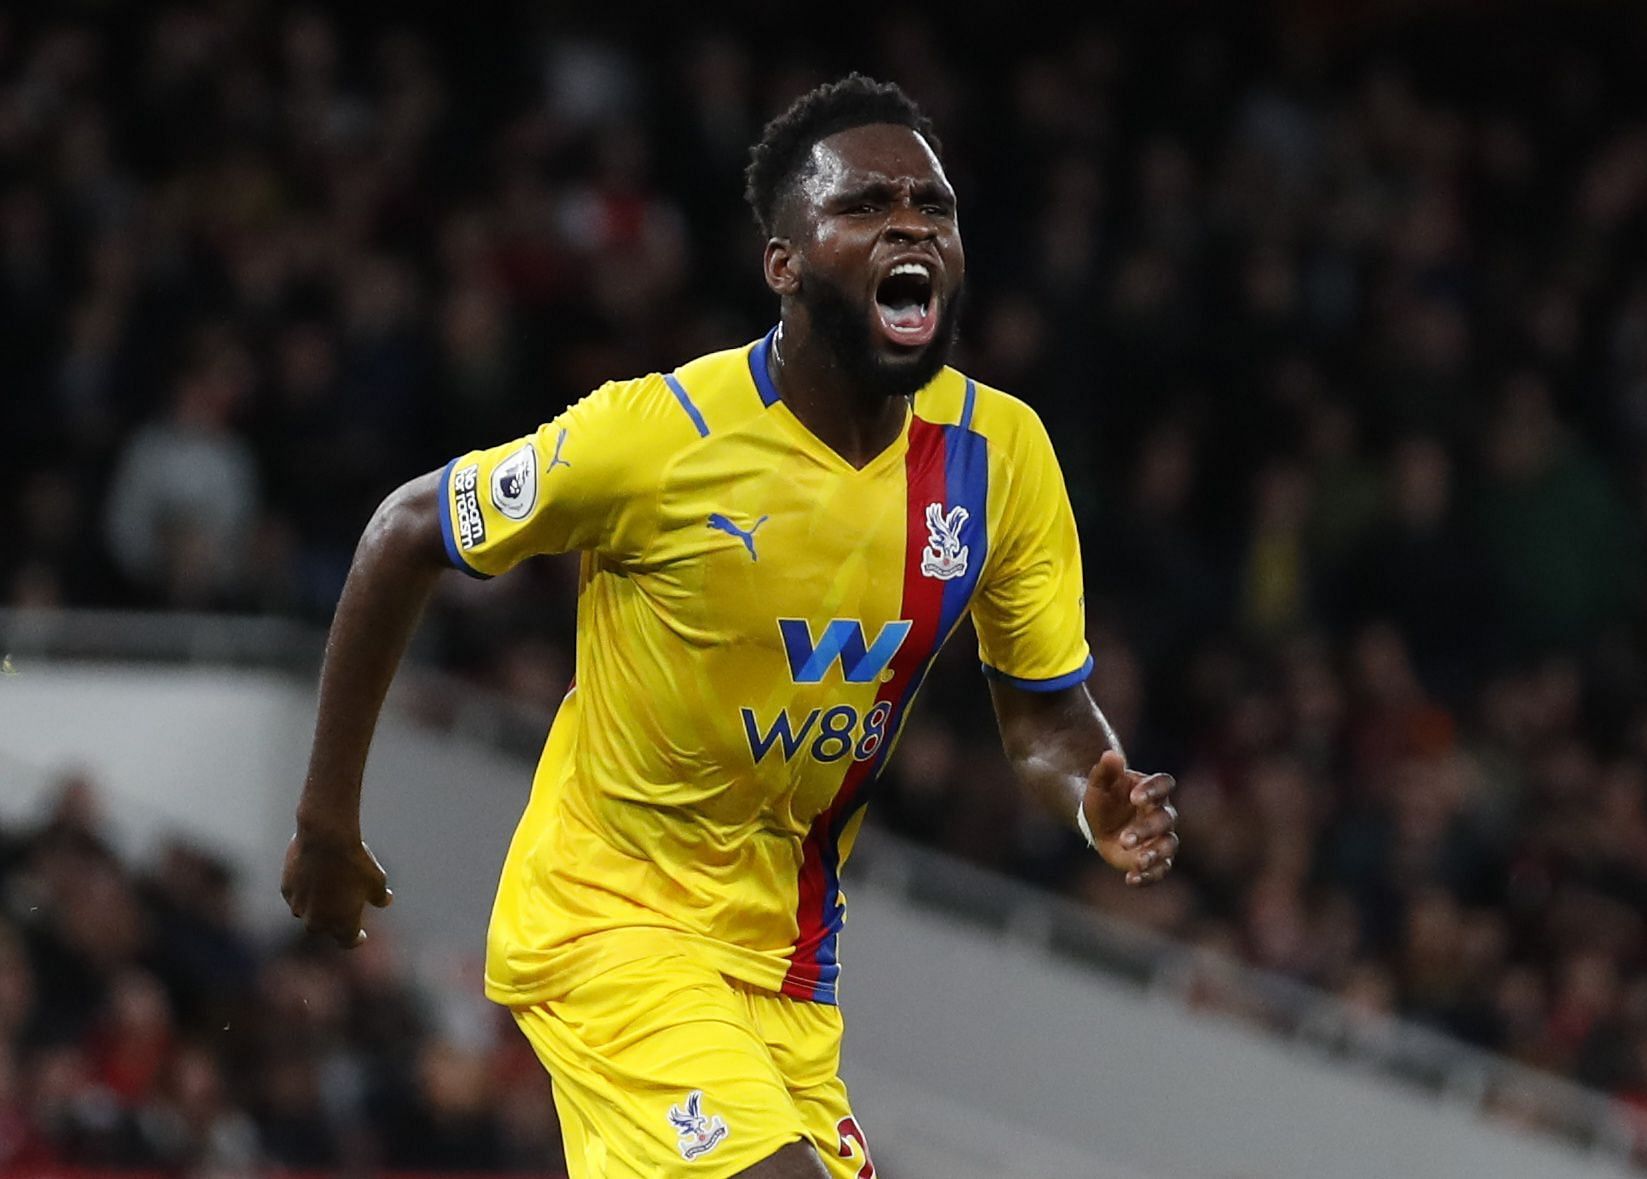 Odsonne Edouard has netted three goals in five appearances (two subs) for Crystal Palace.